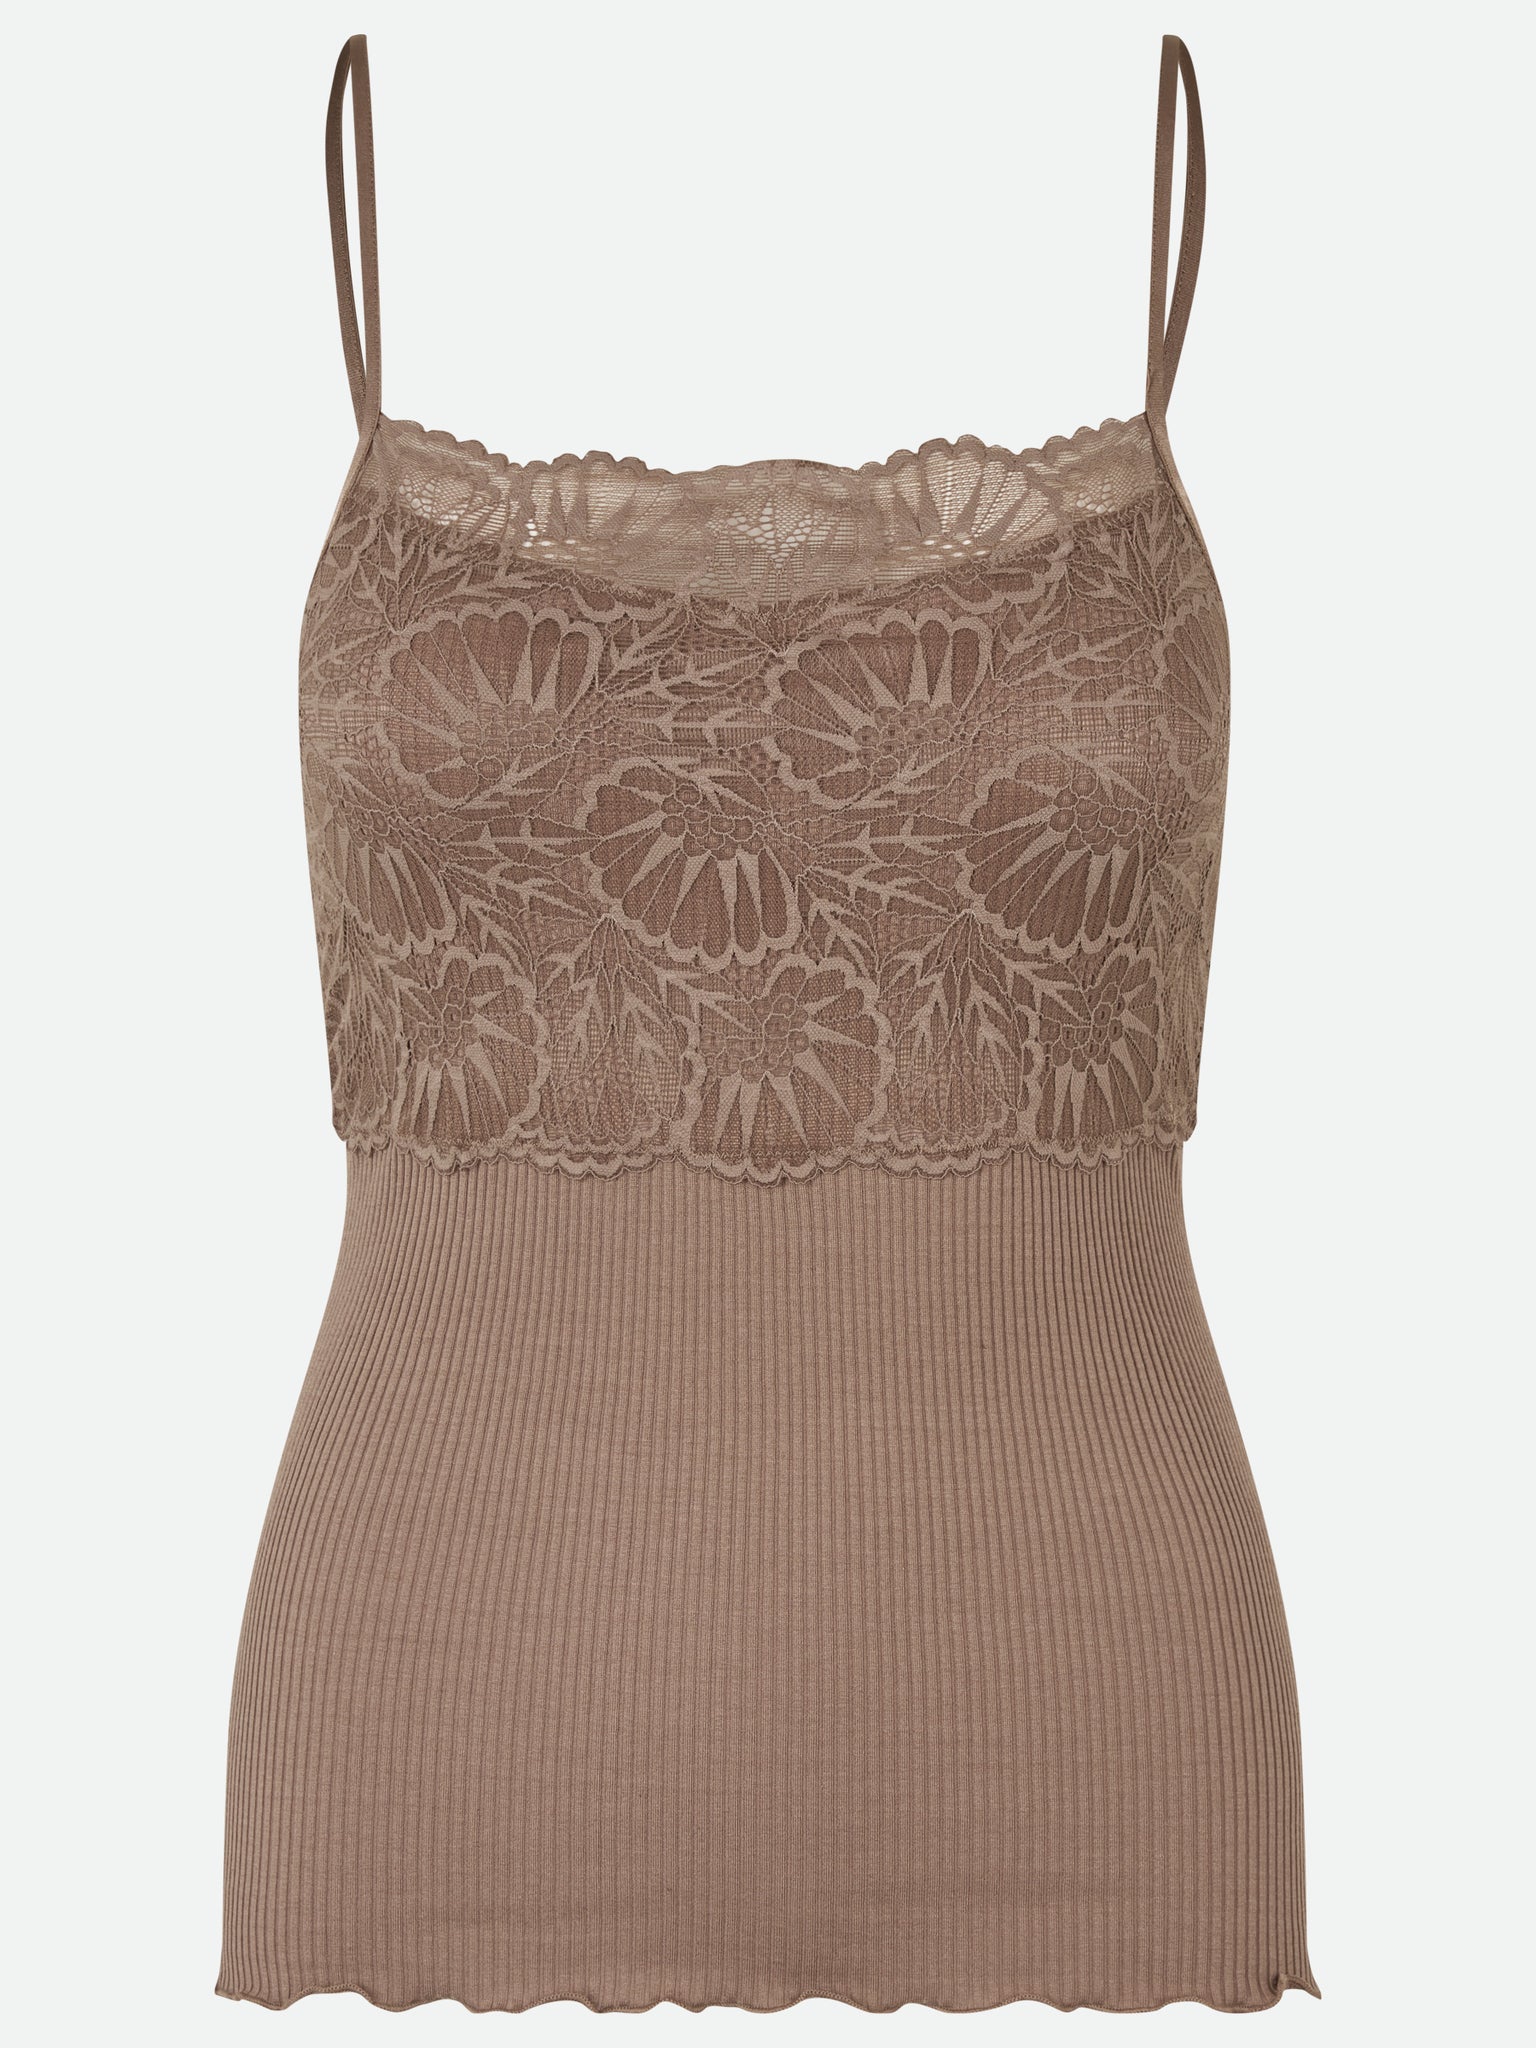 Silk strap top with lace